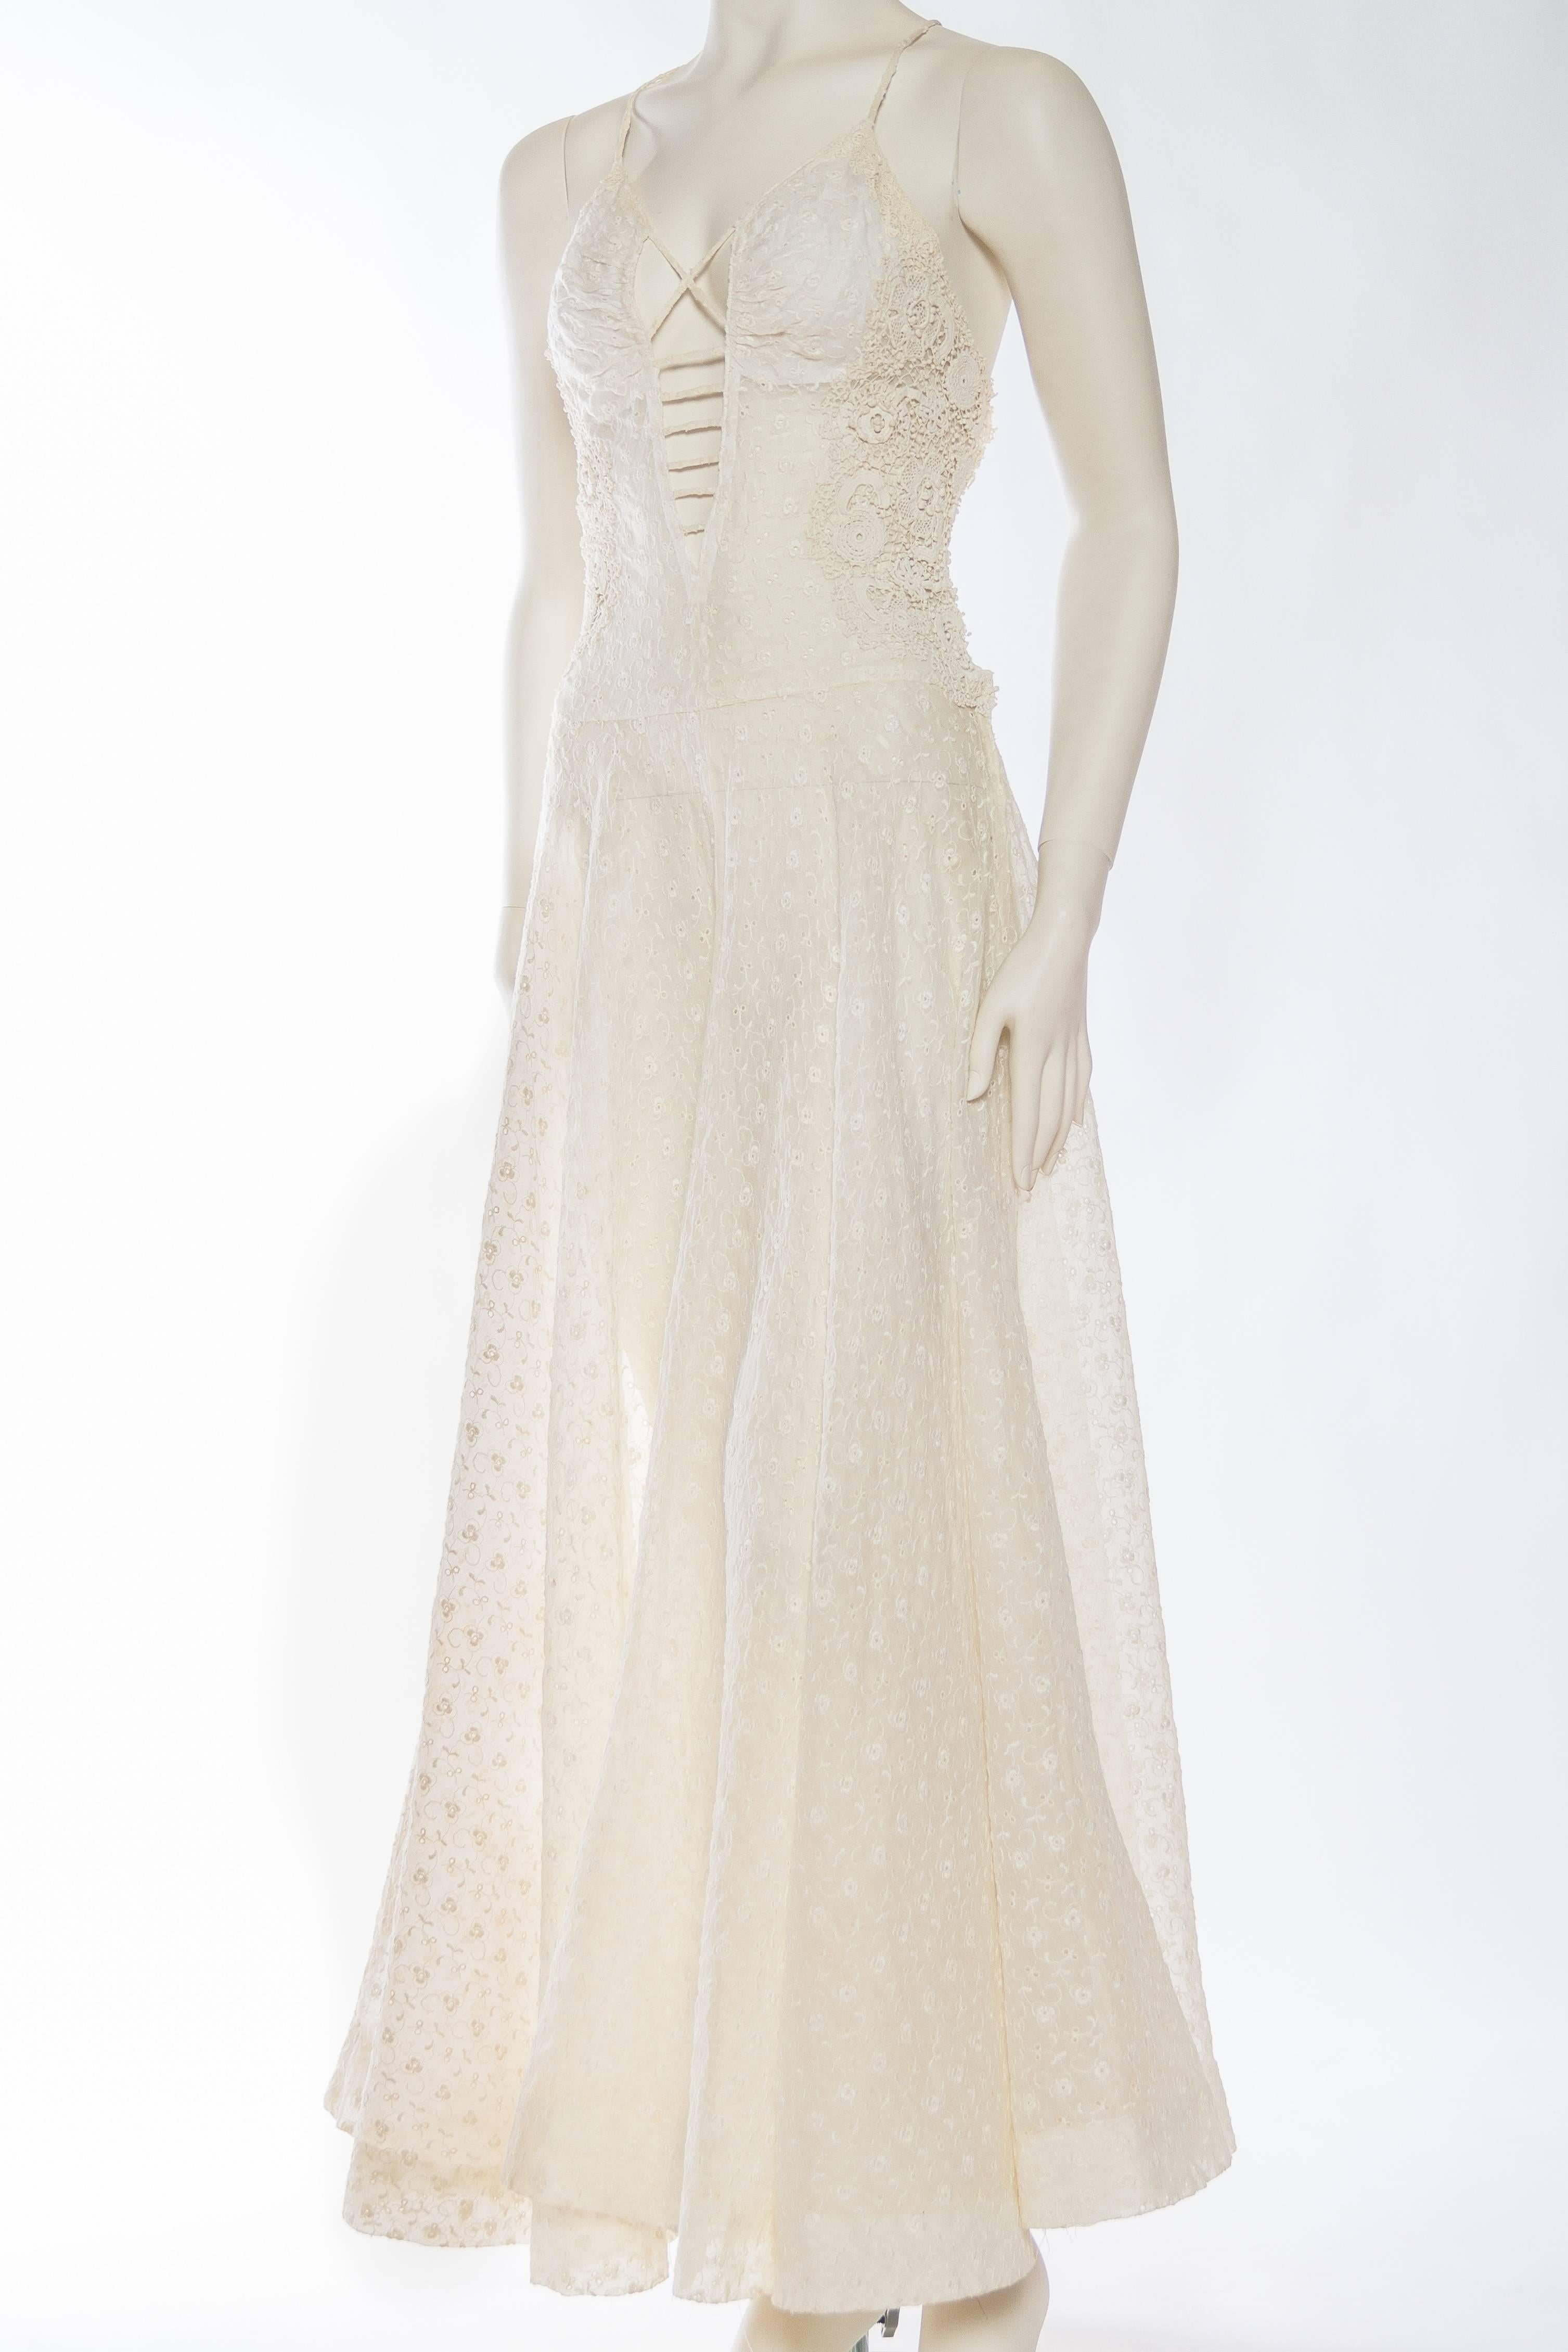 Women's Rebuilt 1930s Embroidered Organdy and Victorian Lace Gown